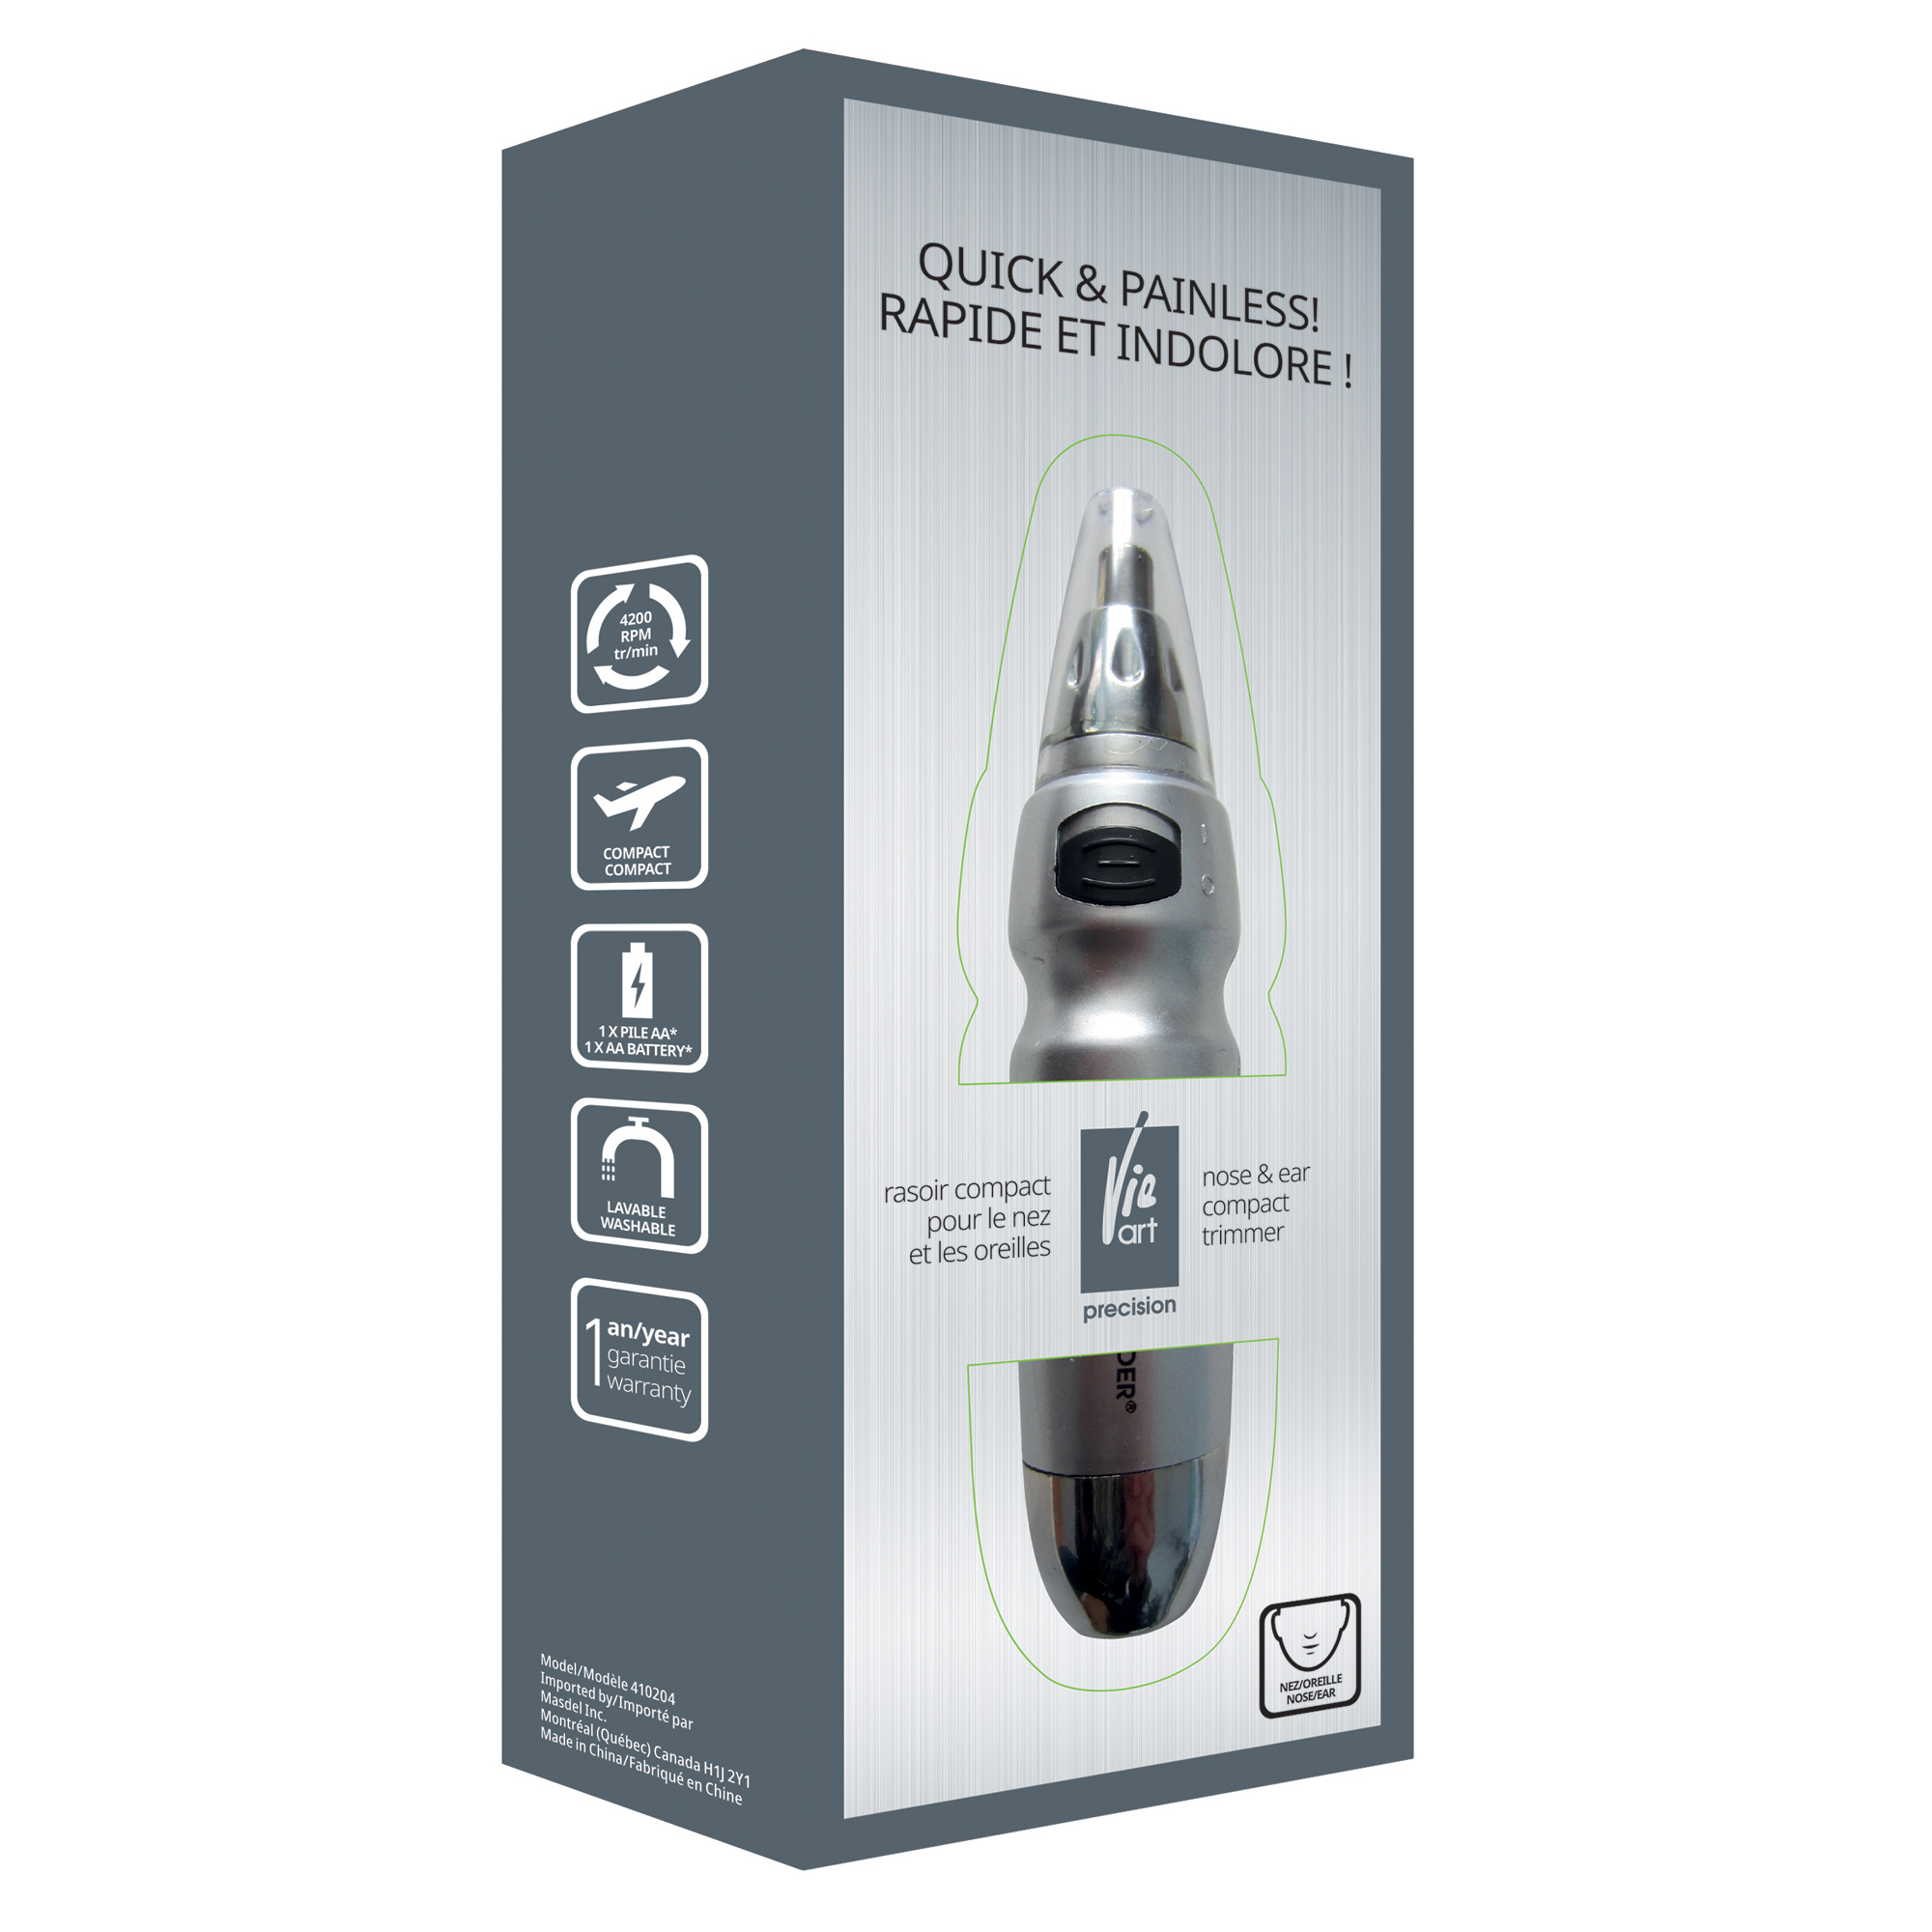 Nose and ear compact trimmer